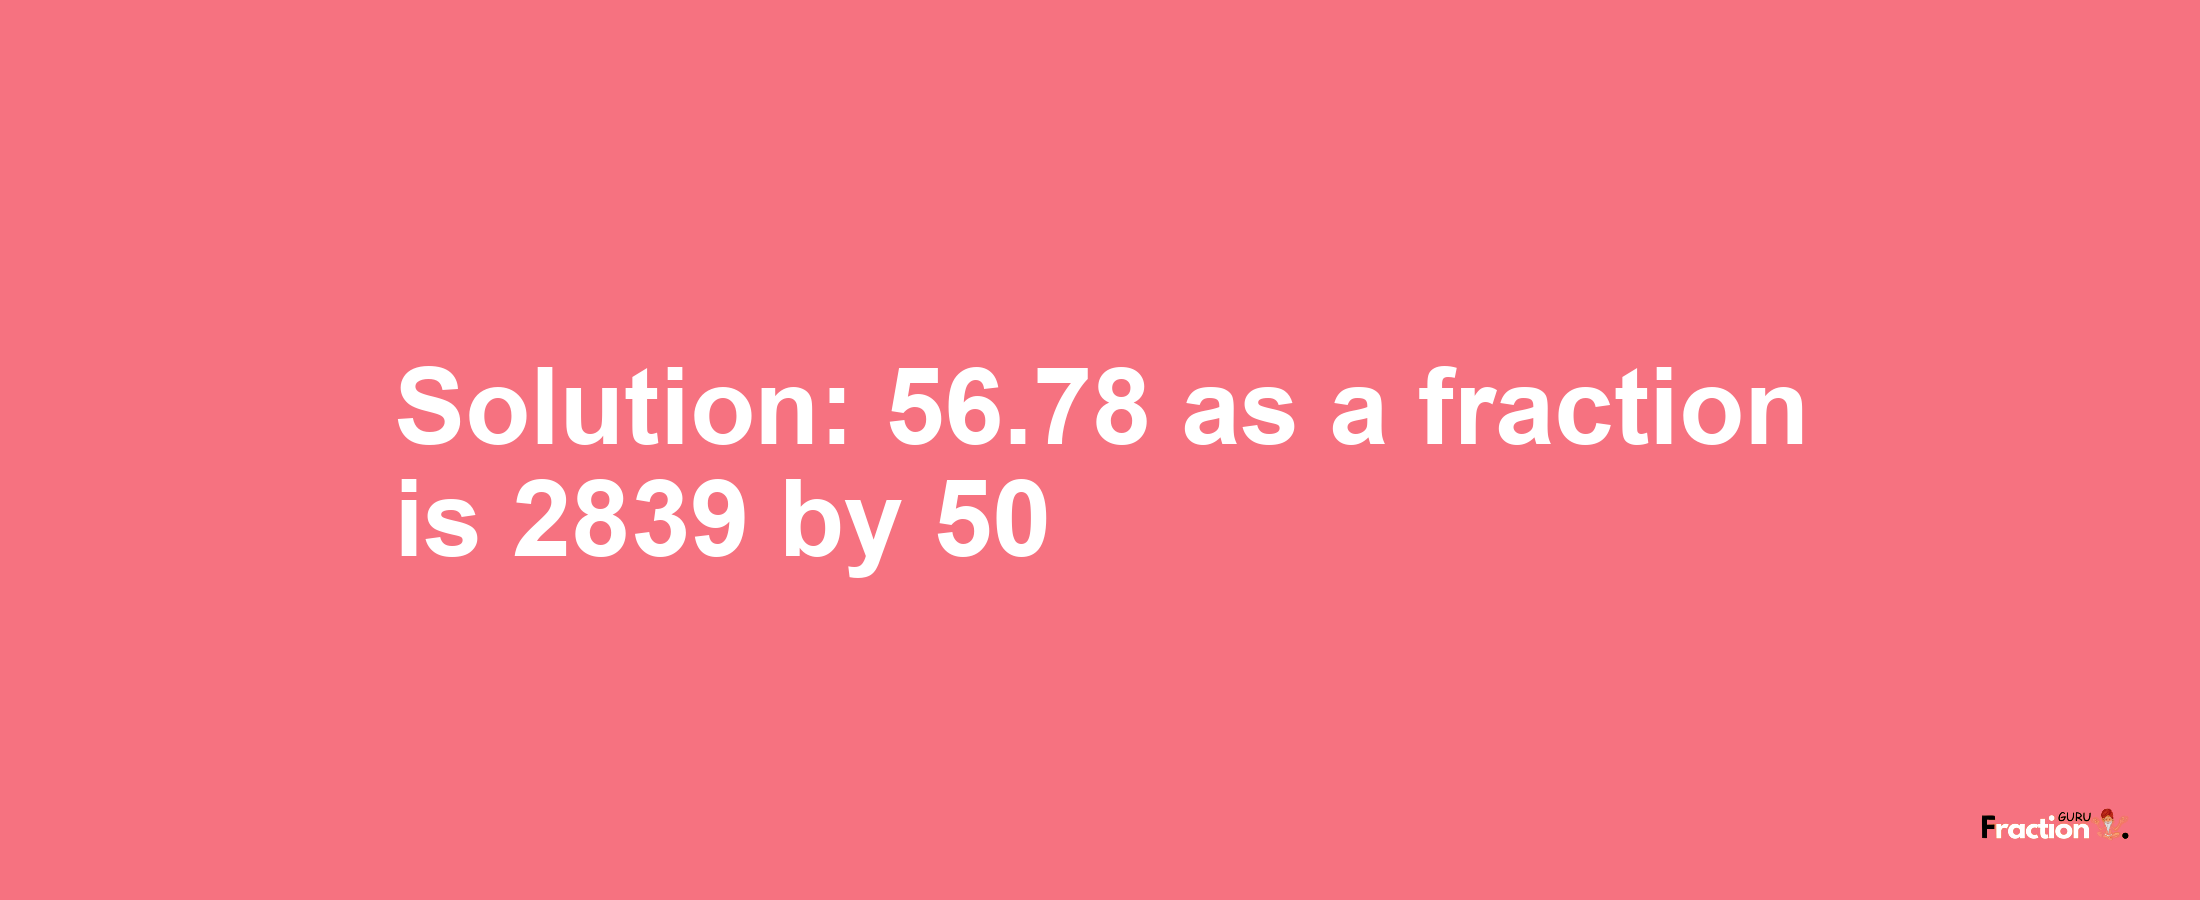 Solution:56.78 as a fraction is 2839/50